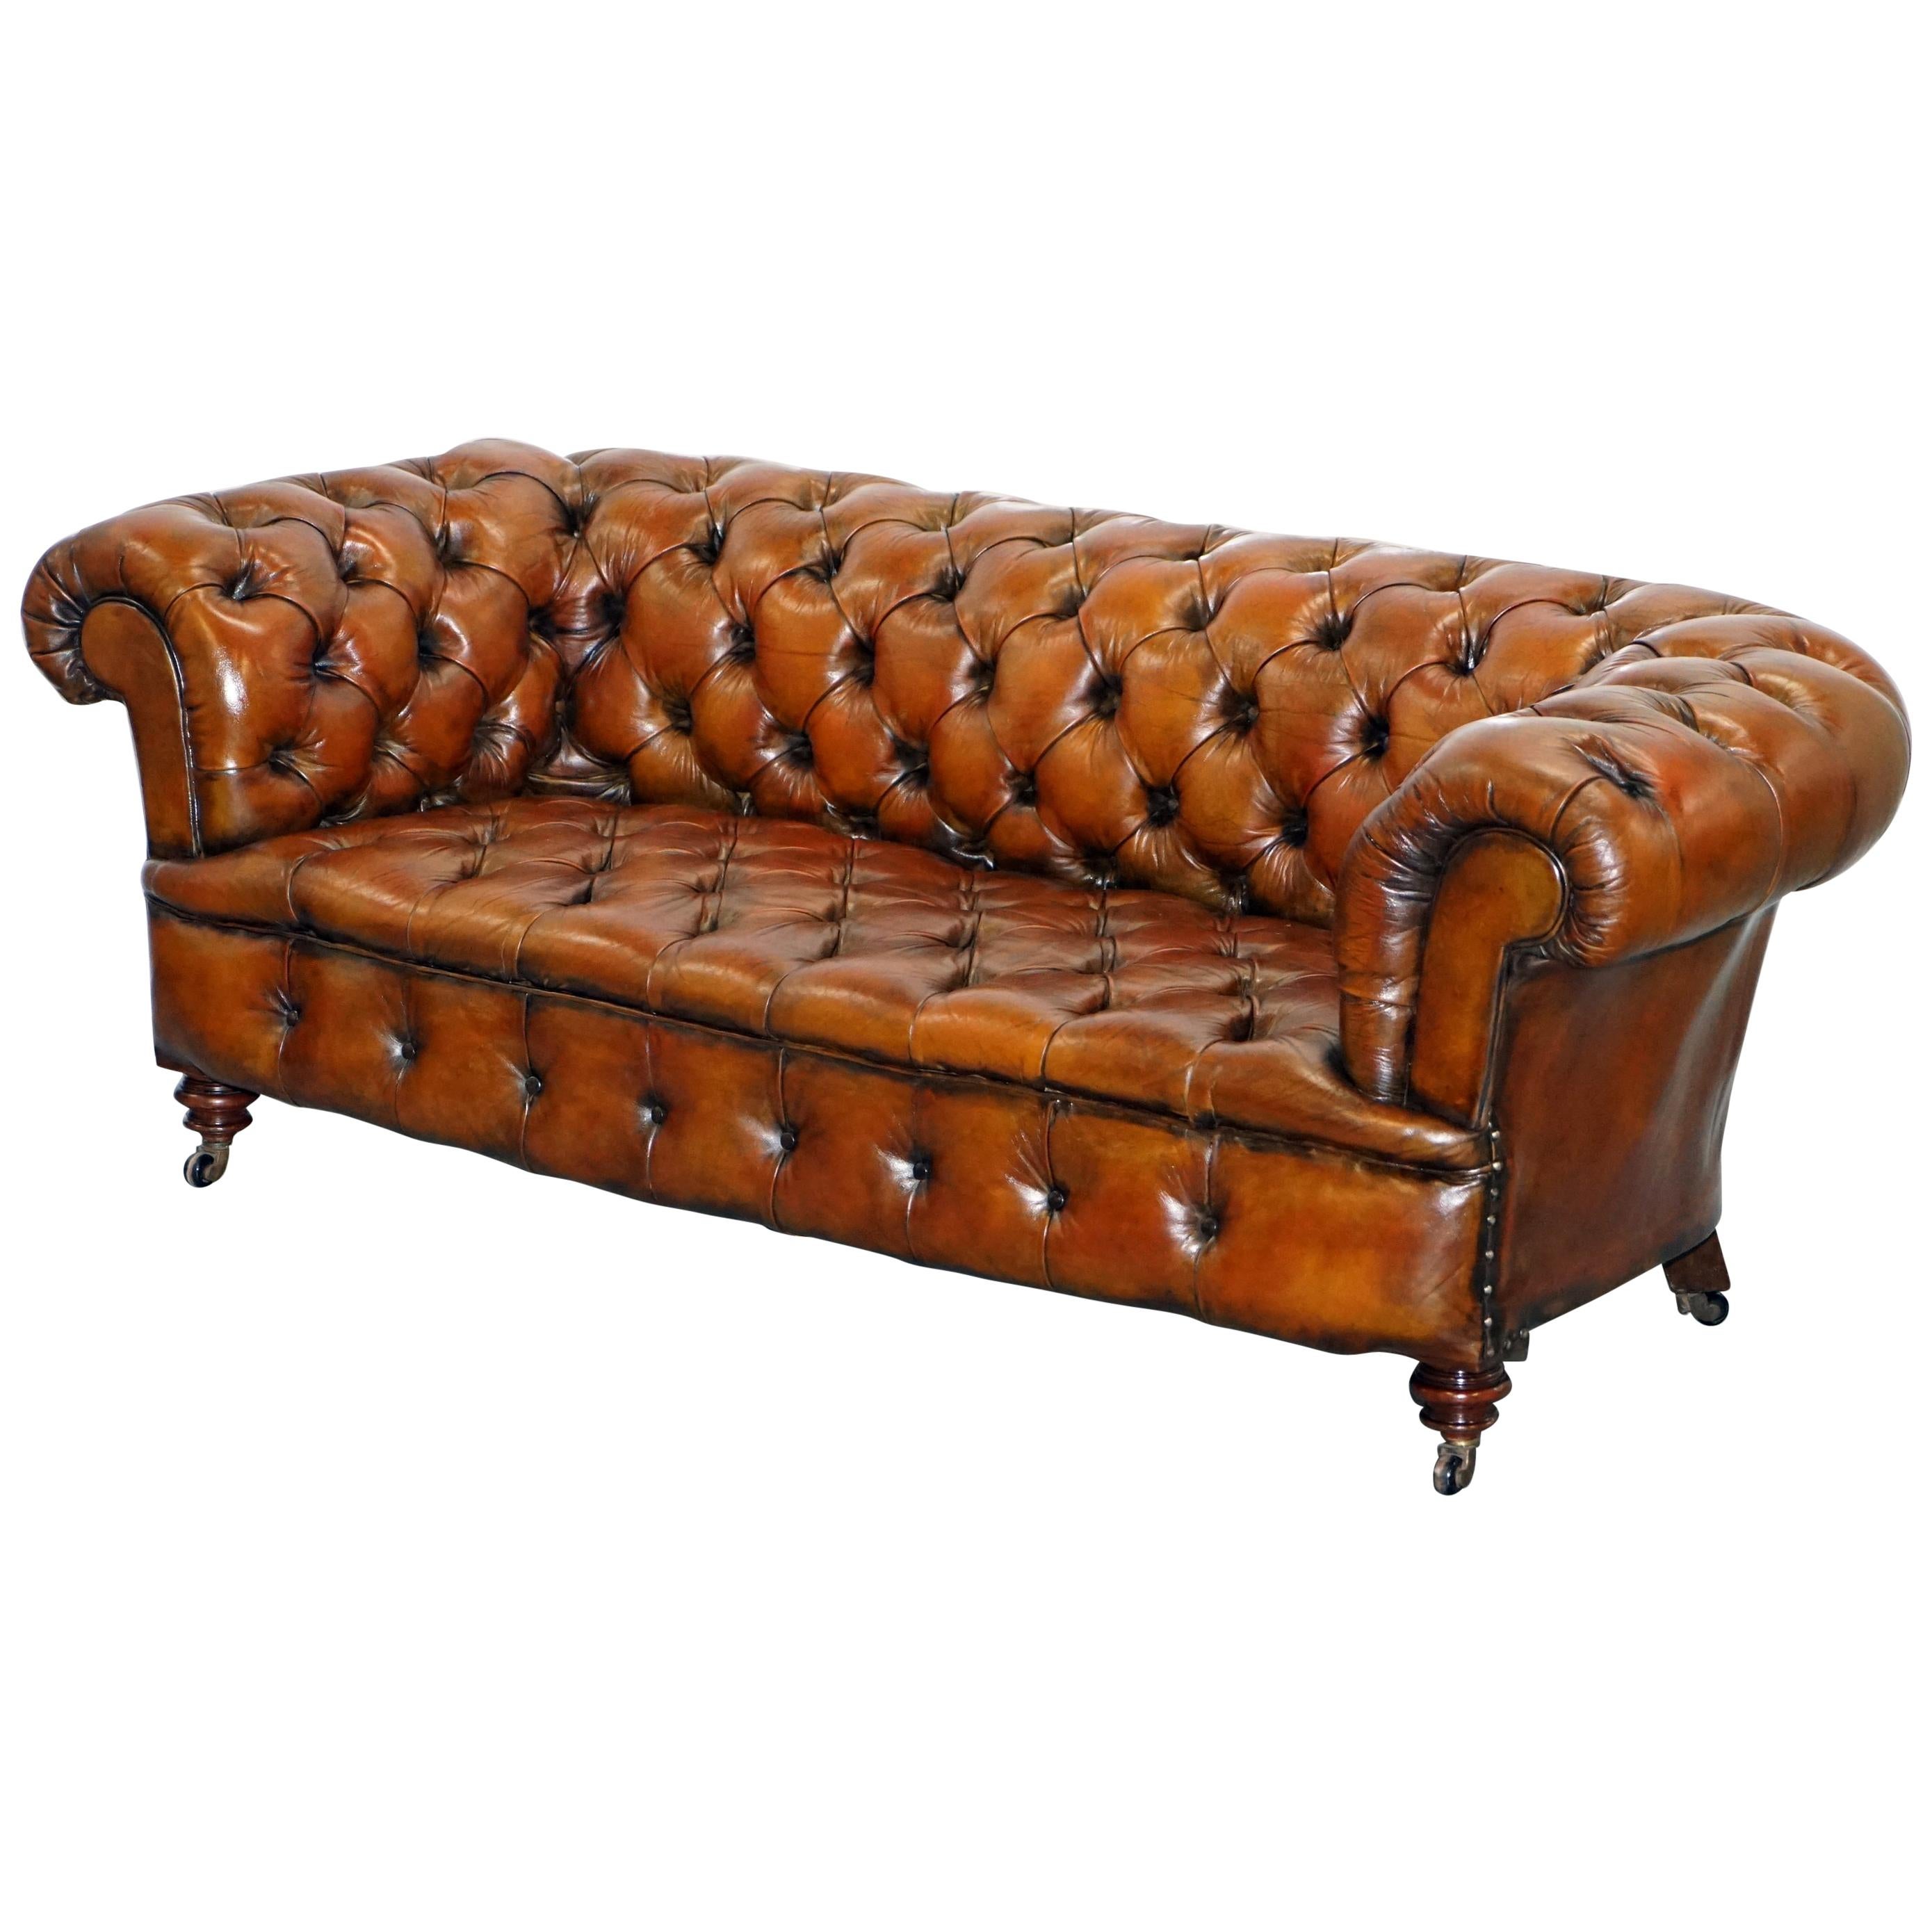 Restored Victorian 1890 Cornelius V. Smith Stamp Chesterfield Leather Sofa Brown For Sale